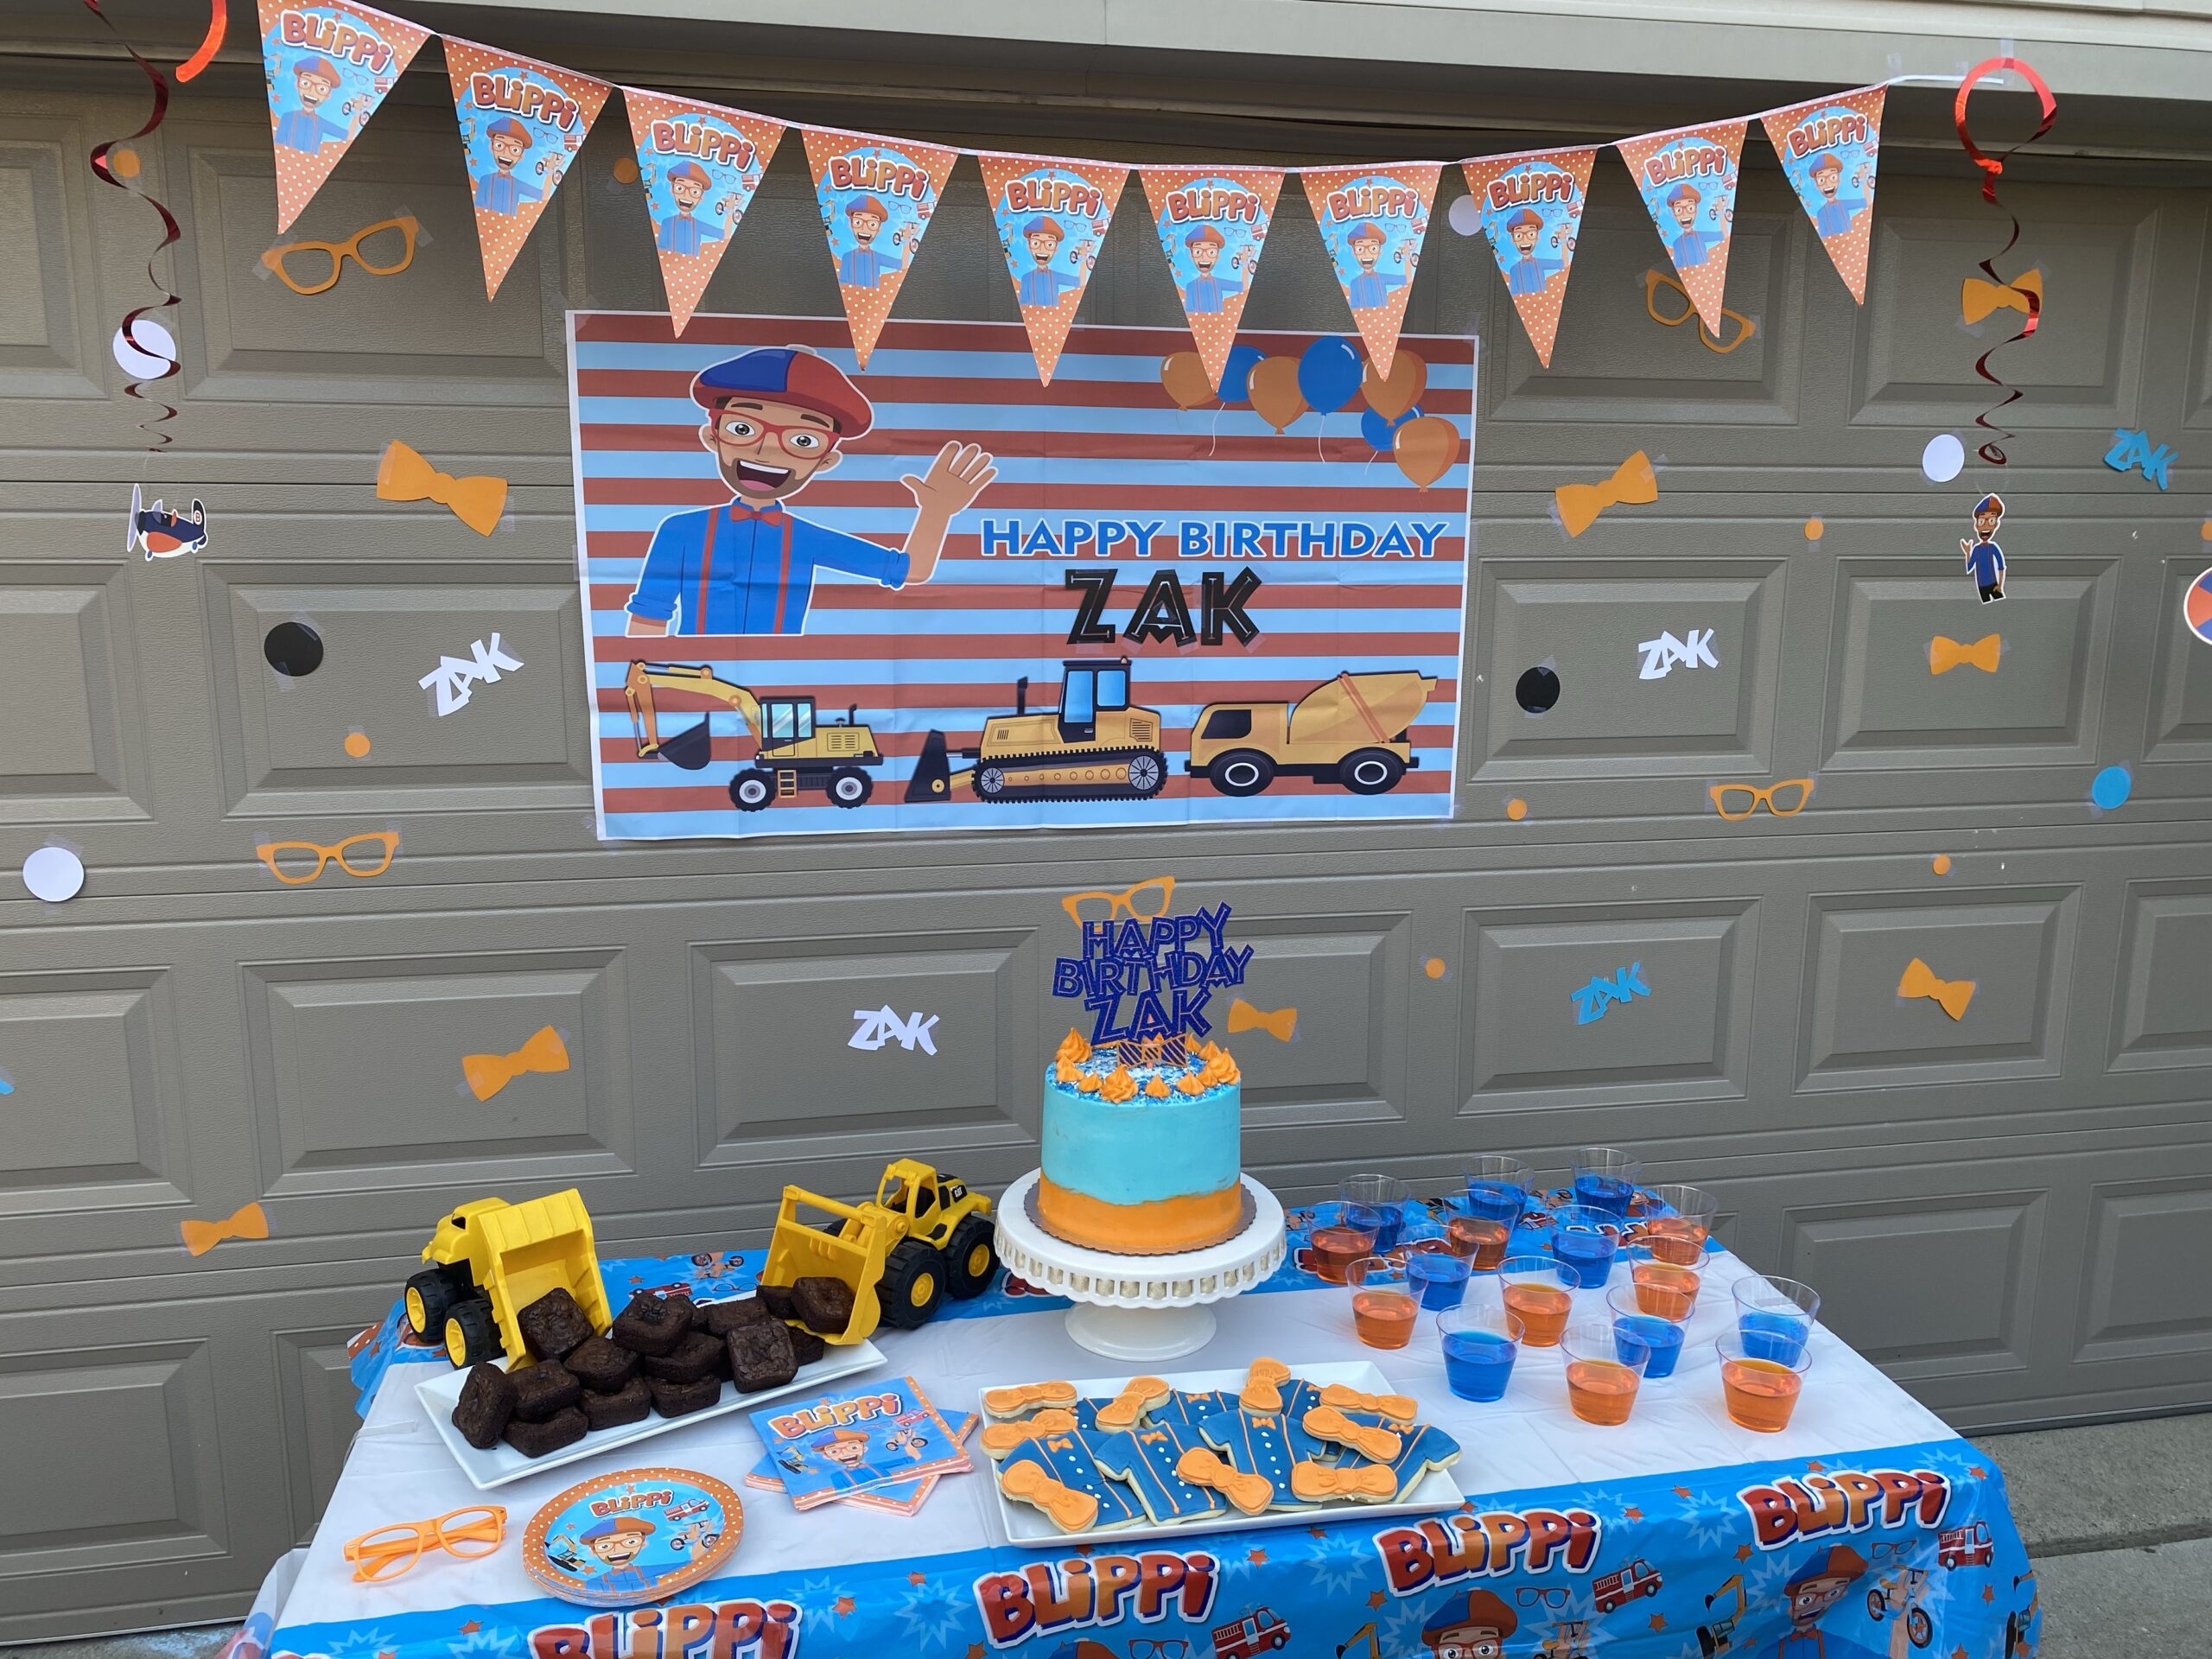 70 Of The Best 3rd Birthday Party Ideas For Boys & Girls - Kids Love WHAT